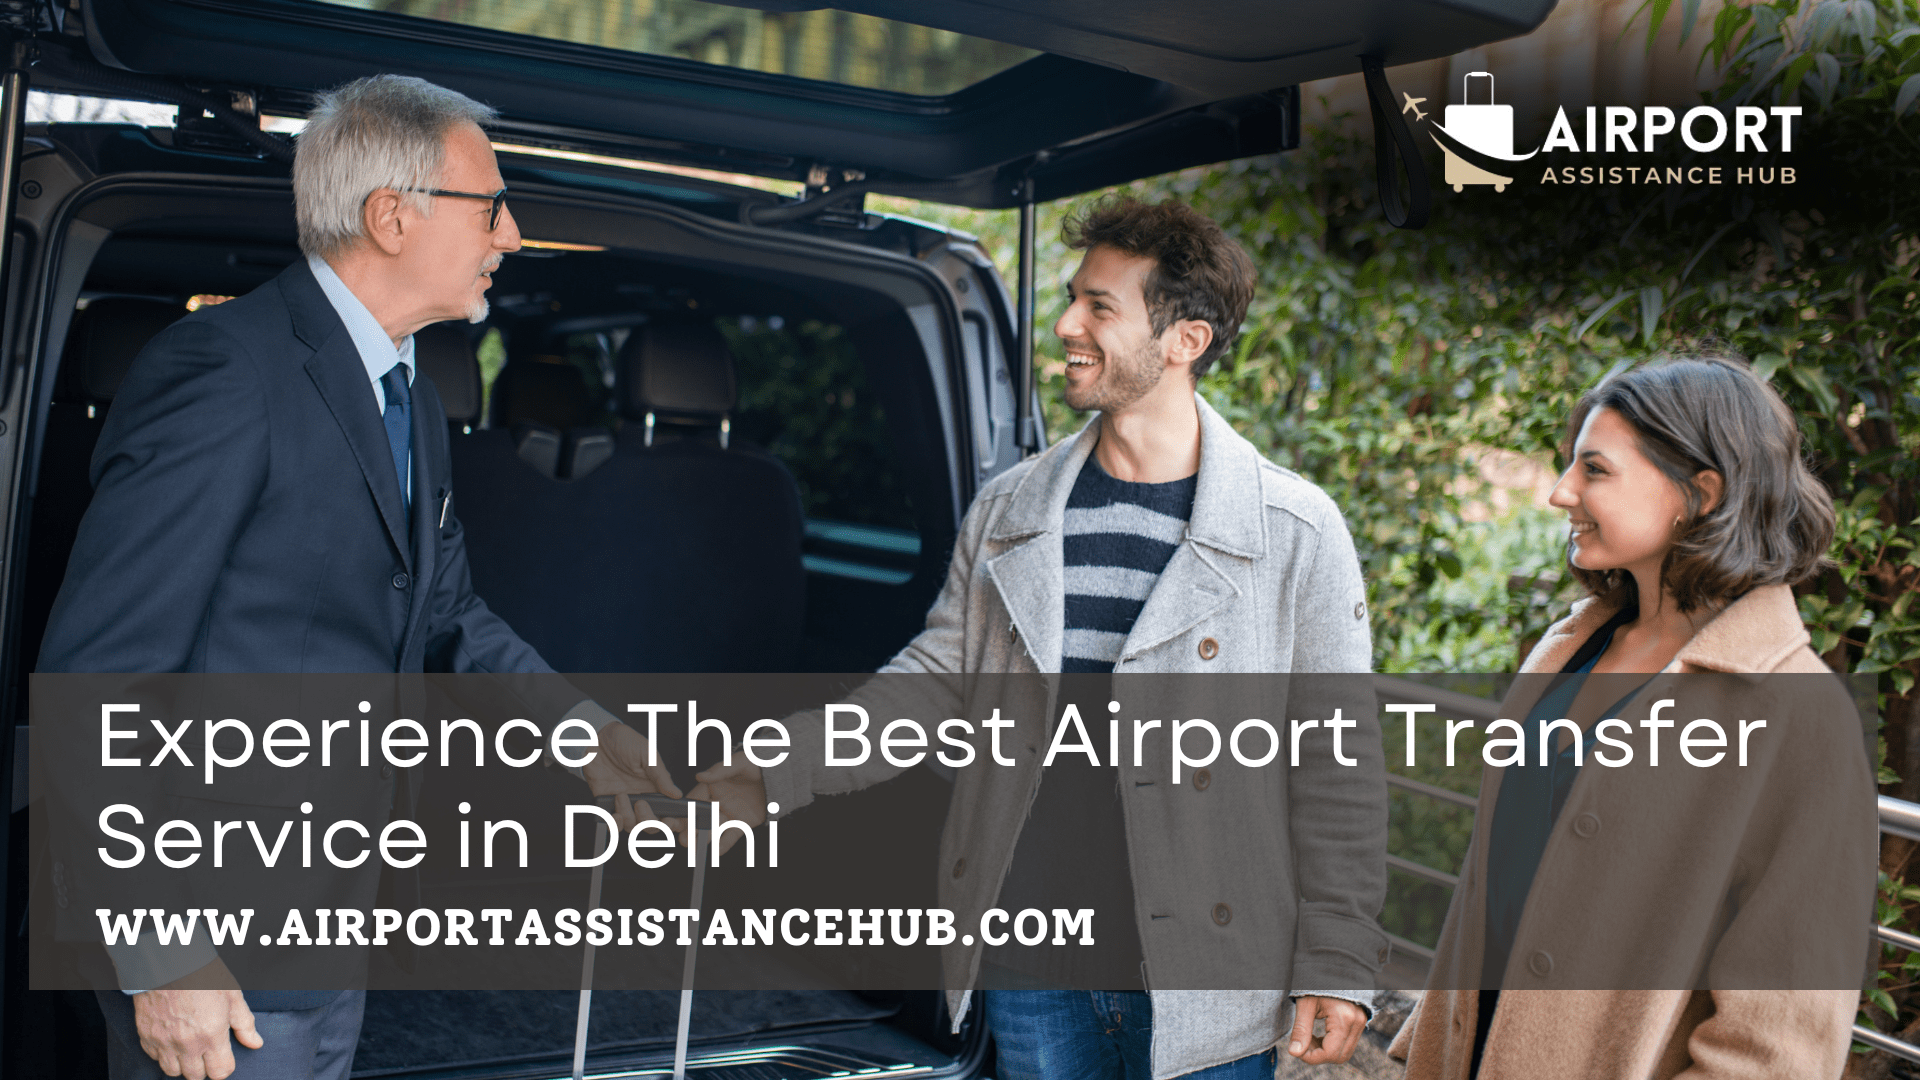 Experience The Best Airport Transfer Service in Delhi